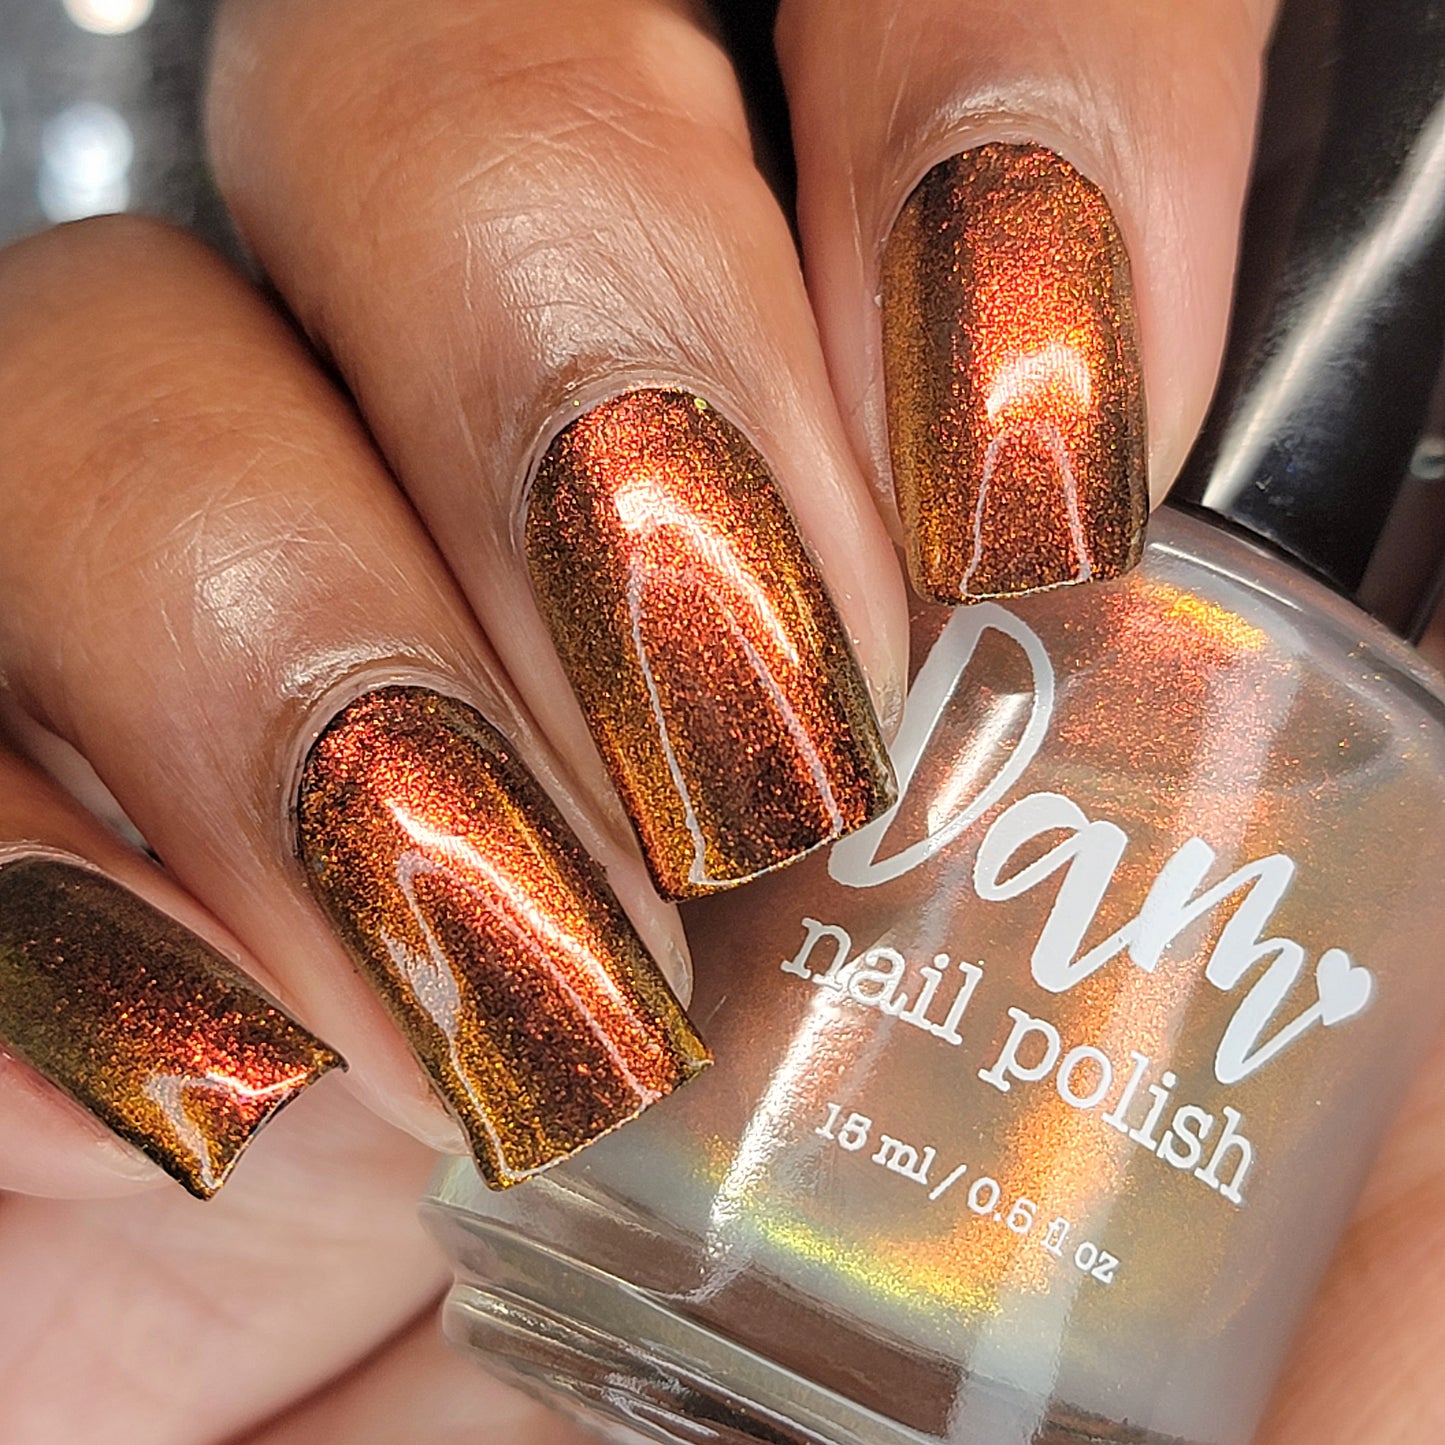 They See BB Rollin’ - Orange Shimmer Nail Polish - Trust the Shimmer Collection